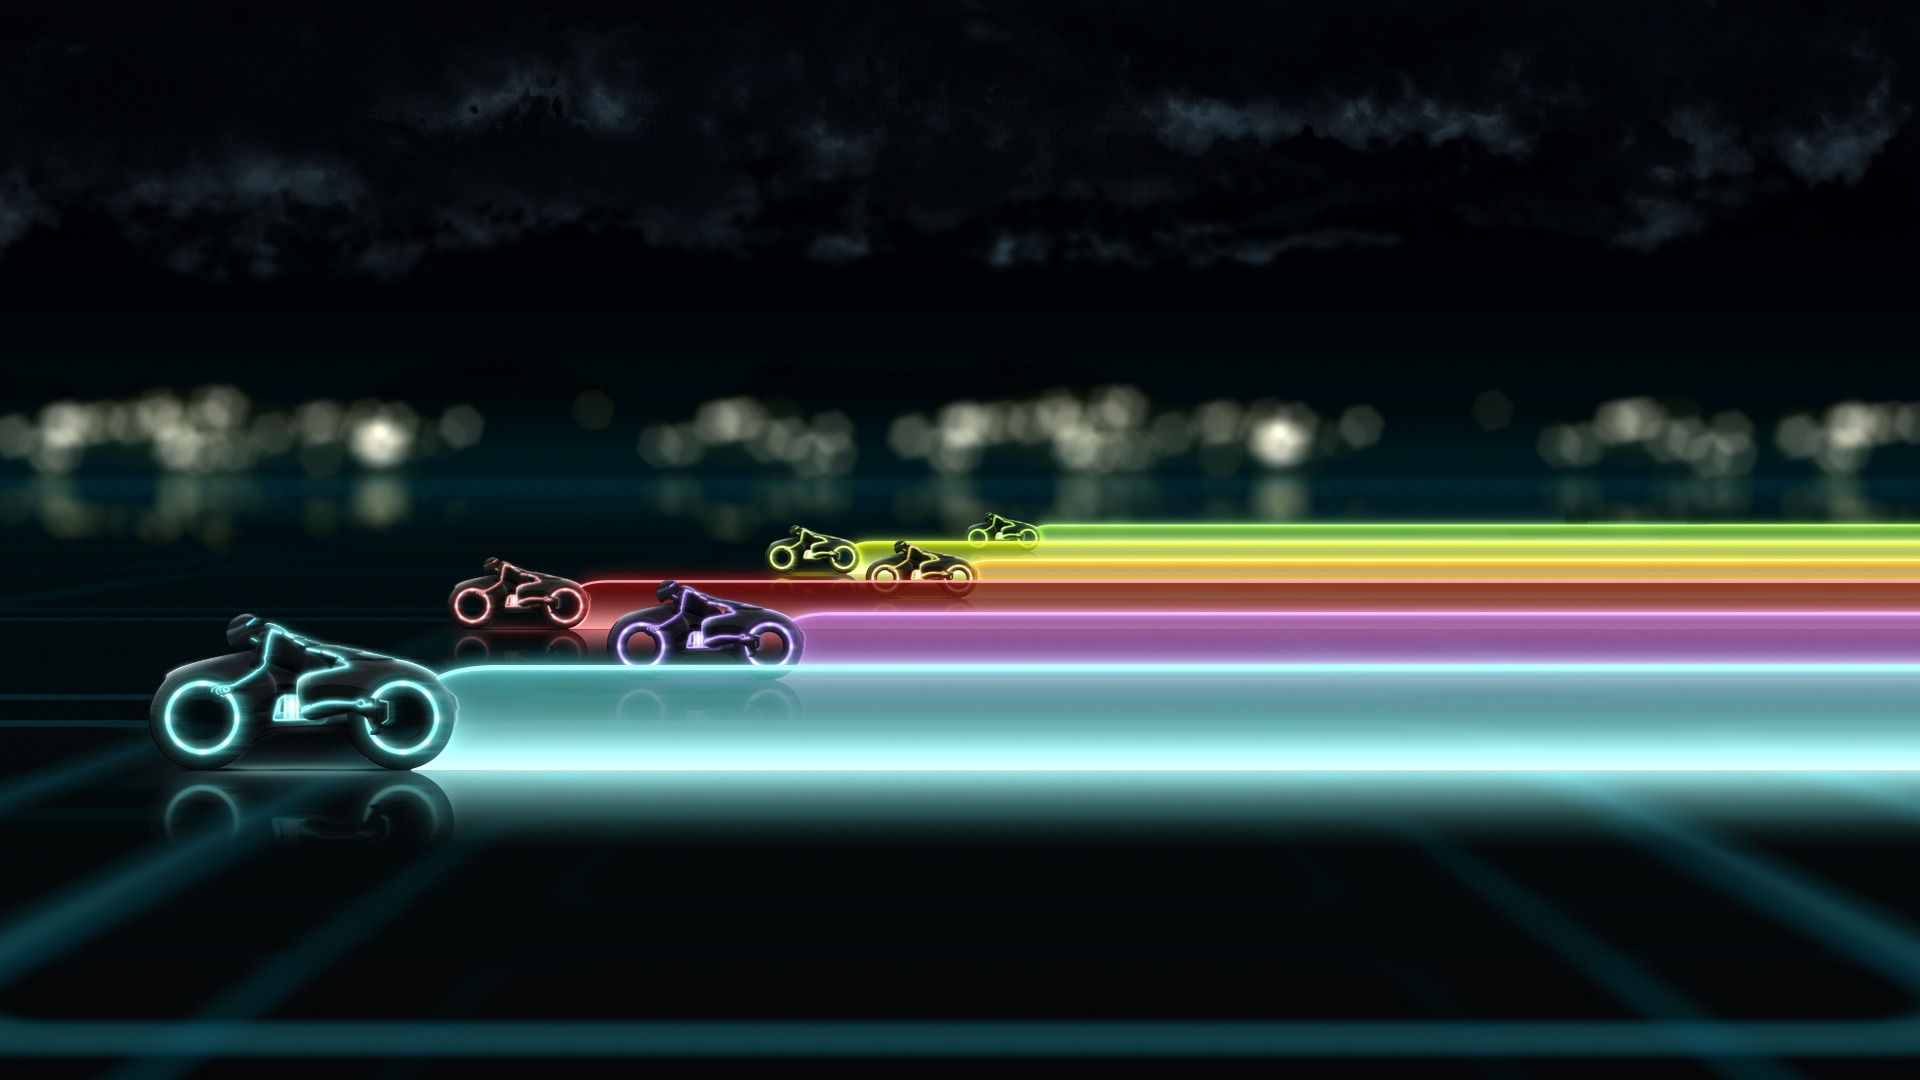 Tron Legacy Race for 1920 x 1080 HDTV 1080p resolution